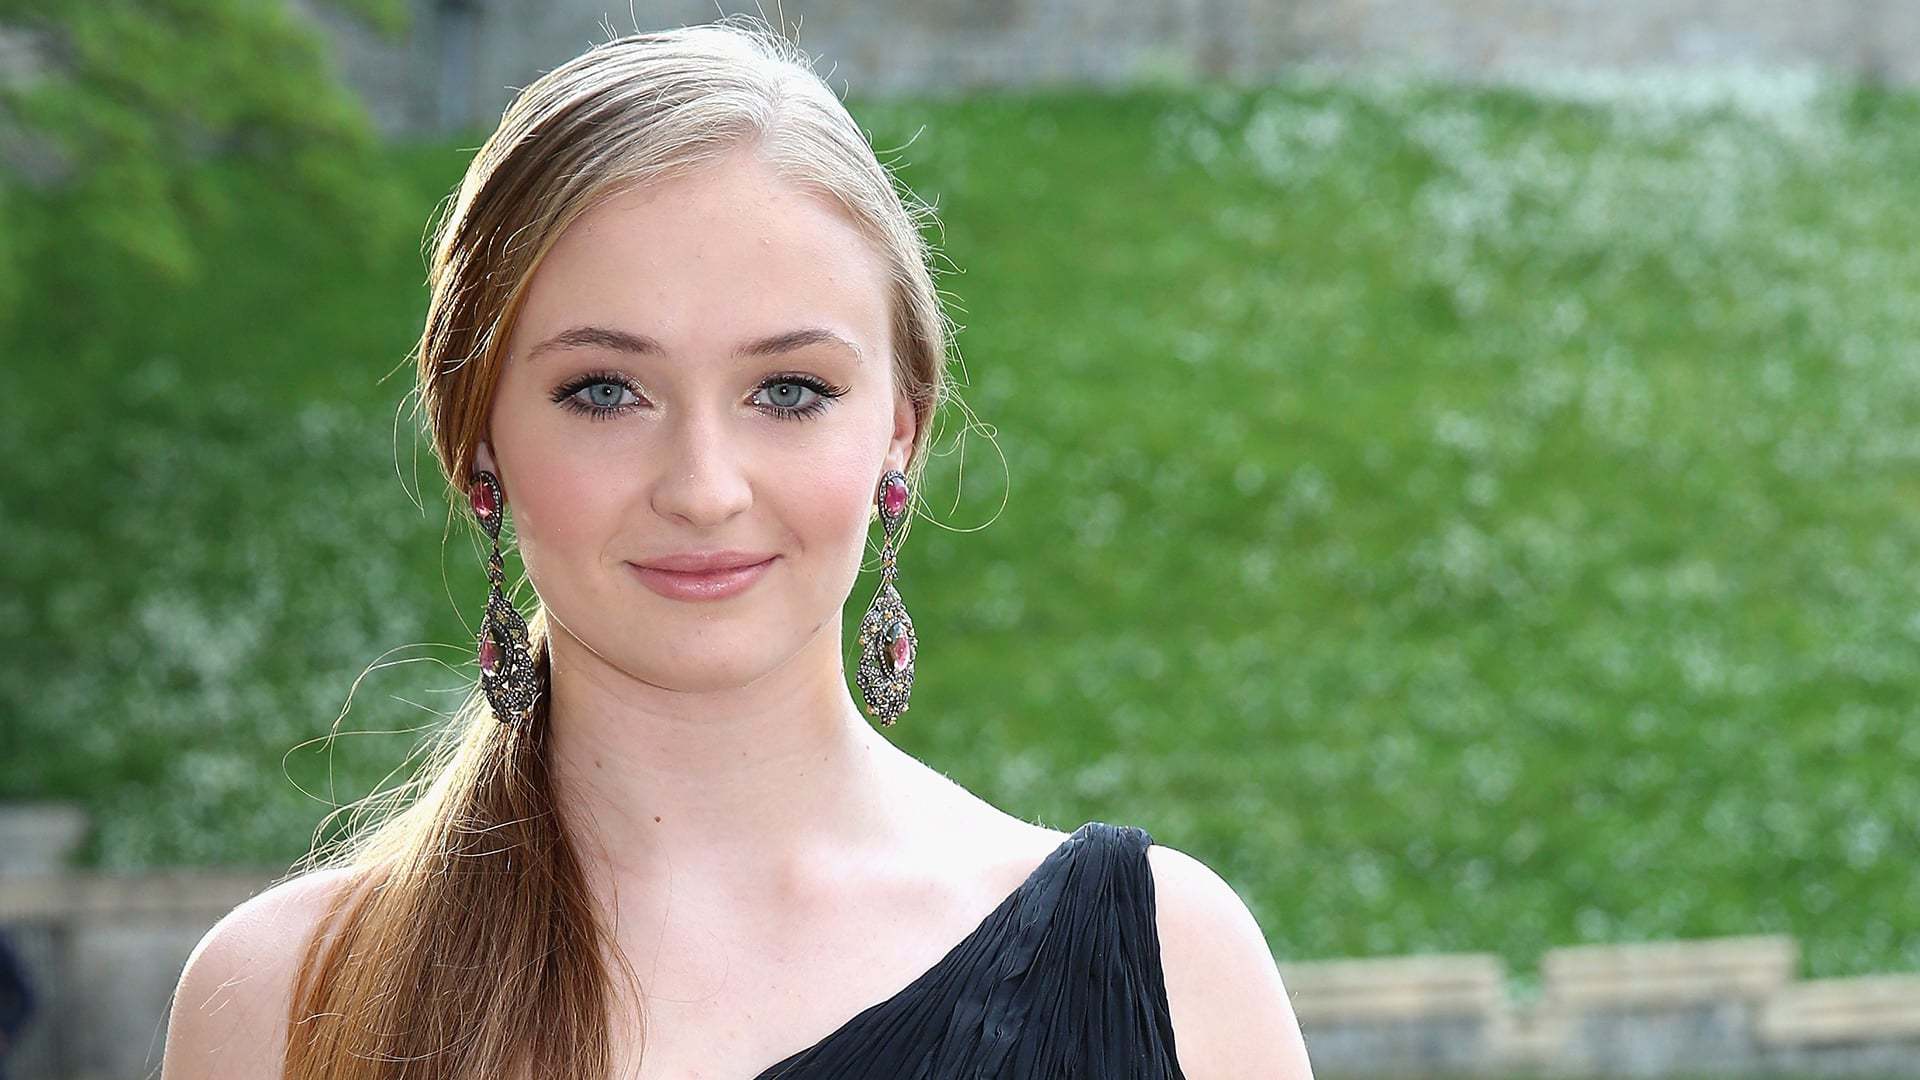 Sophie Turner Wallpaper Image Photo Picture Background